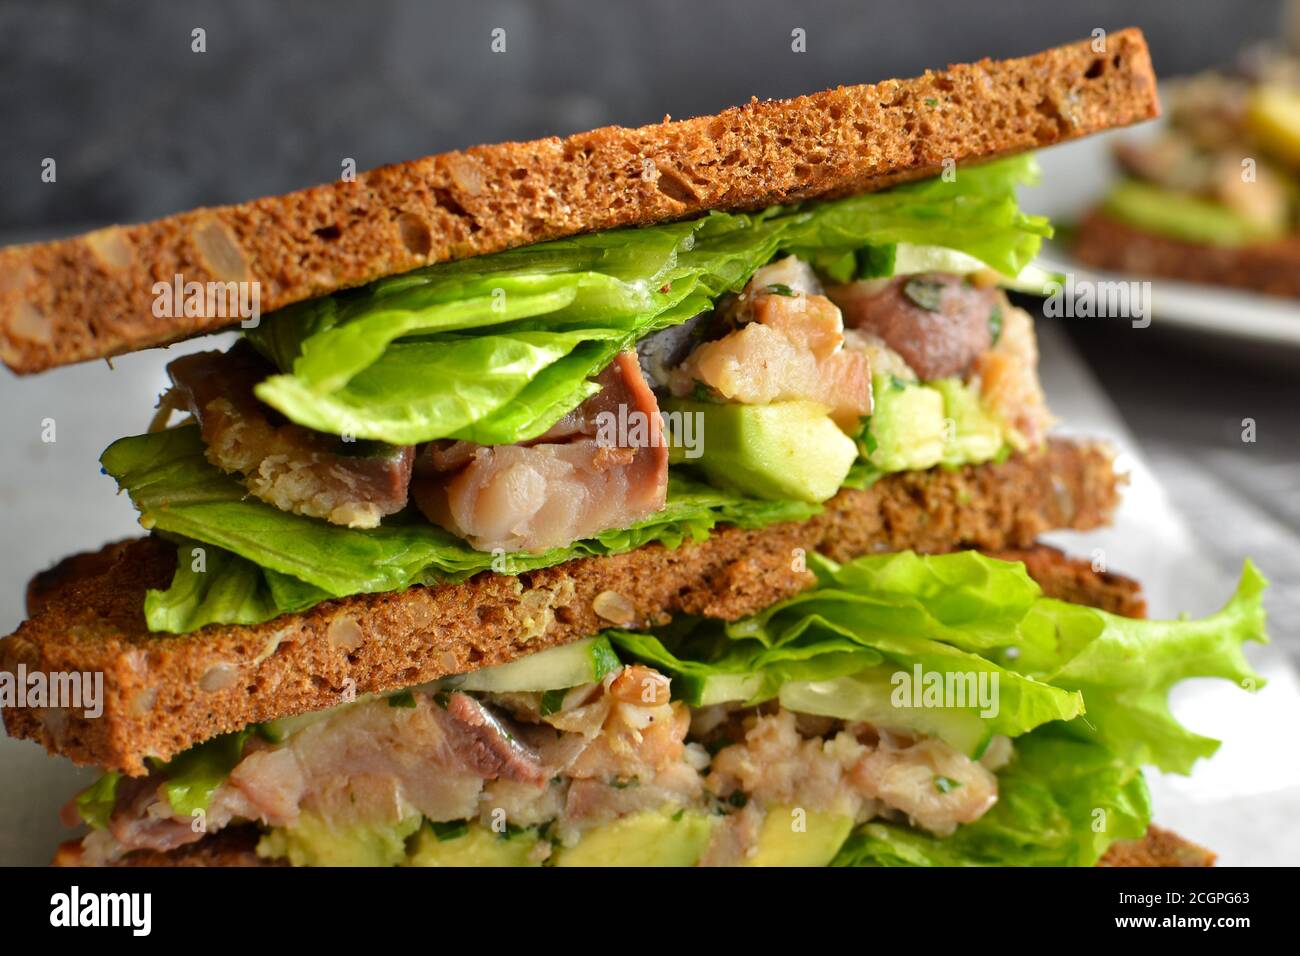 Dark bread sandwich with seeds. Sandwich with lettuce, avocado and fish. Healthy lunch or brunch. Dark background. Close-up. Stock Photo